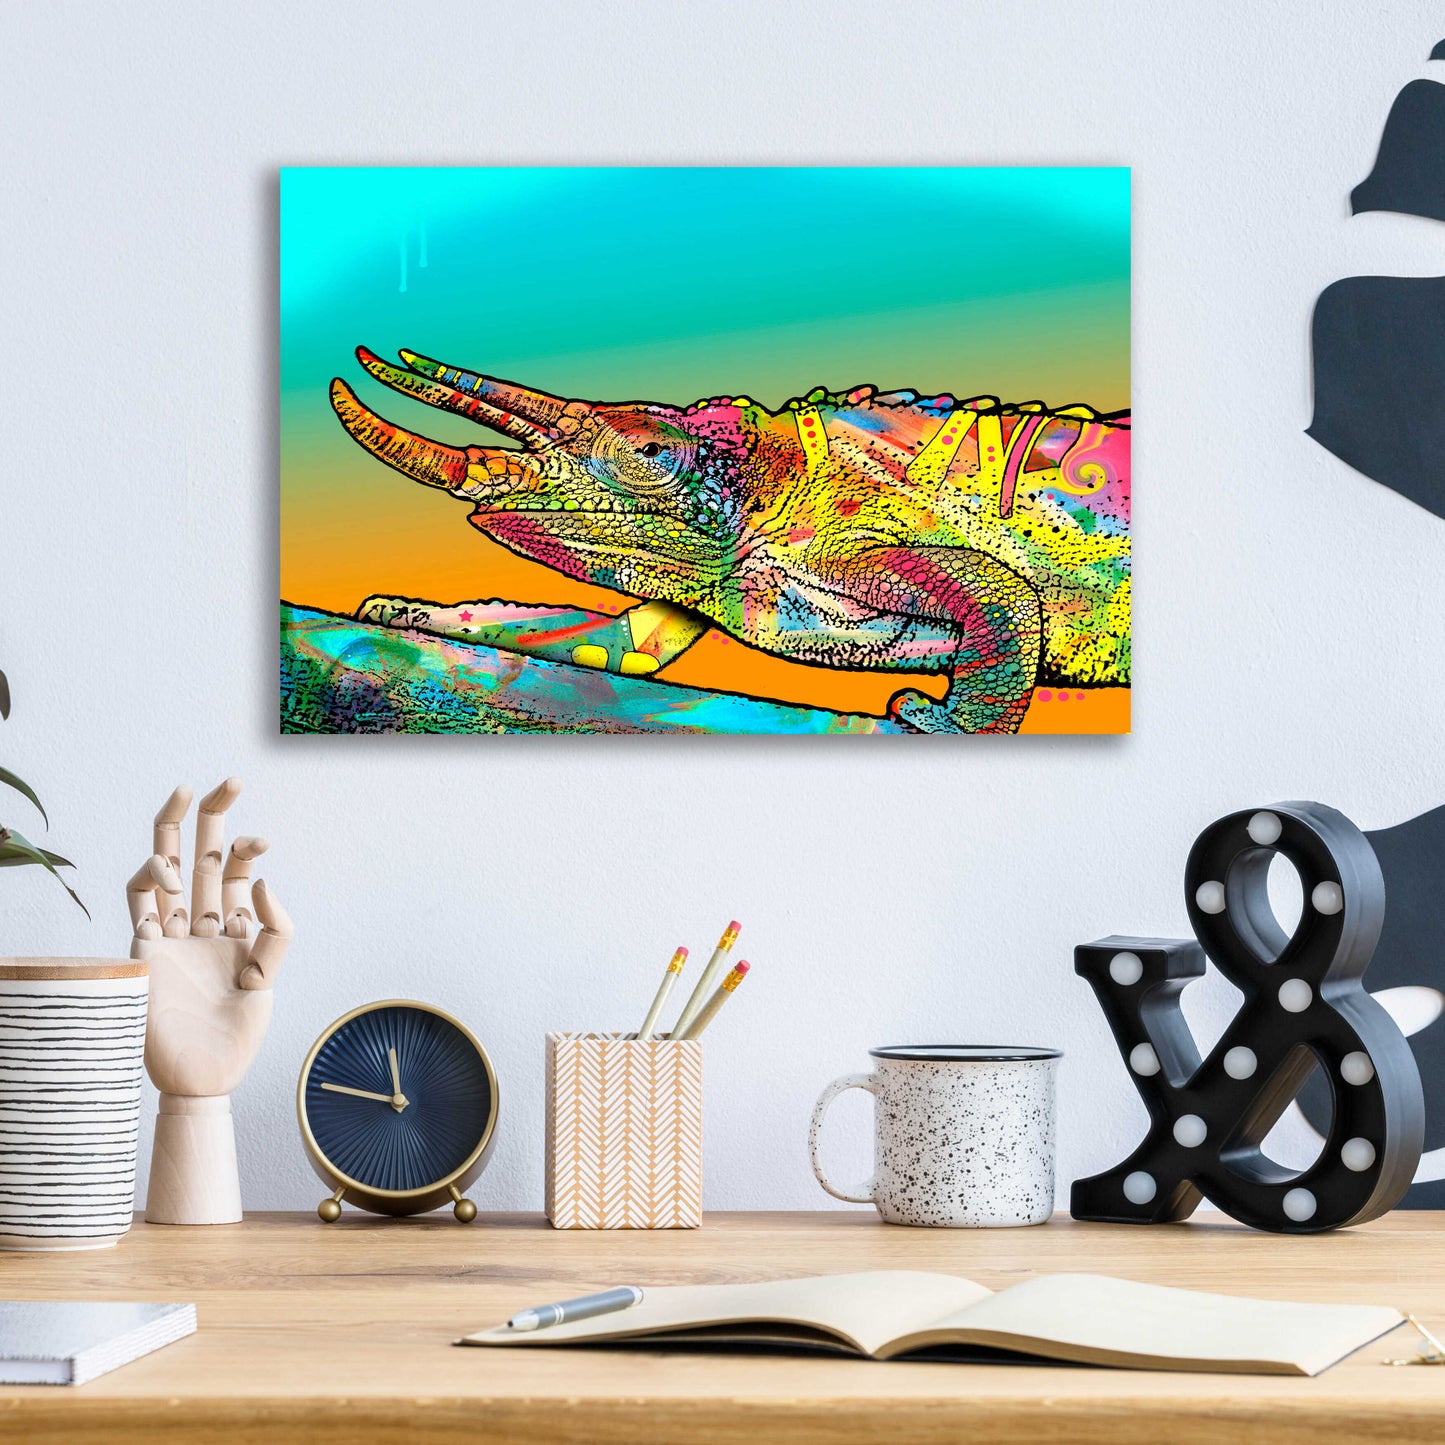 Epic Art 'Chameleon' by Dean Russo, Acrylic Glass Wall Art,16x12